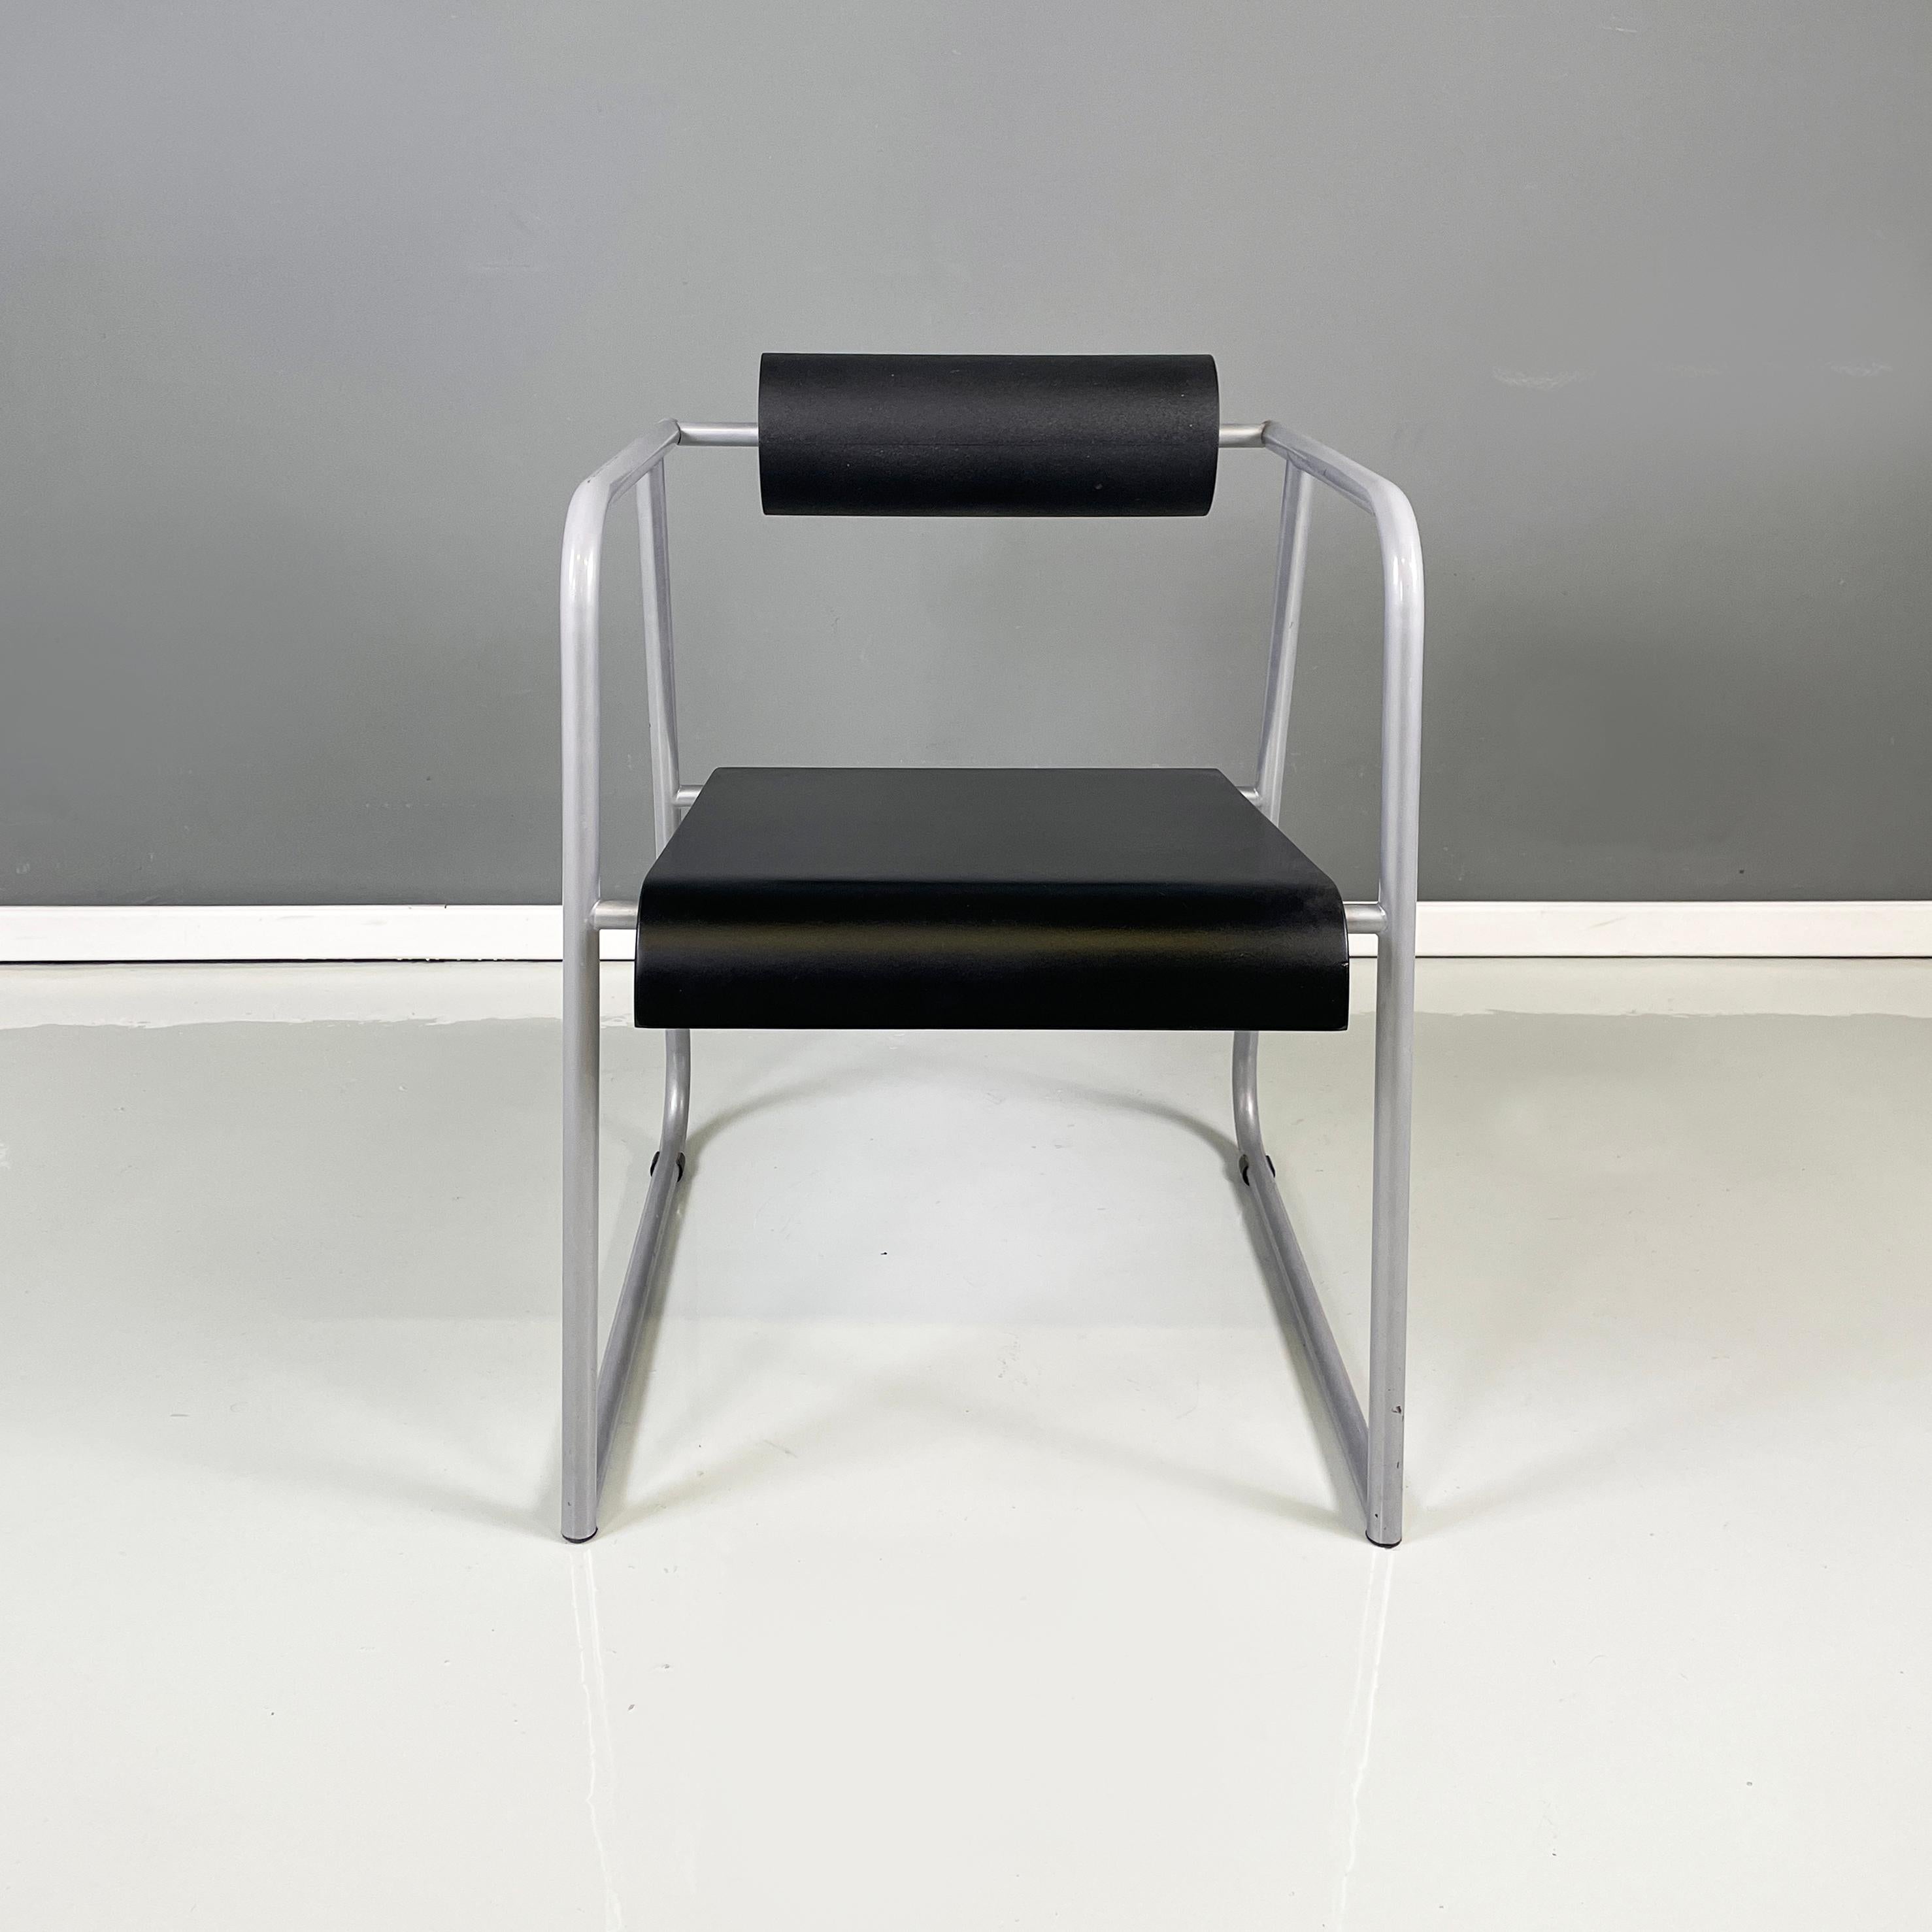 Italian modern Chair in gray metal, black rubber and wood, 1980s
Chair with gray painted tubular metal structure. The rectangular seat is in black curved wood and the cylindrical backrest is in black rubber.
1980s. 
Good condition, with scattered